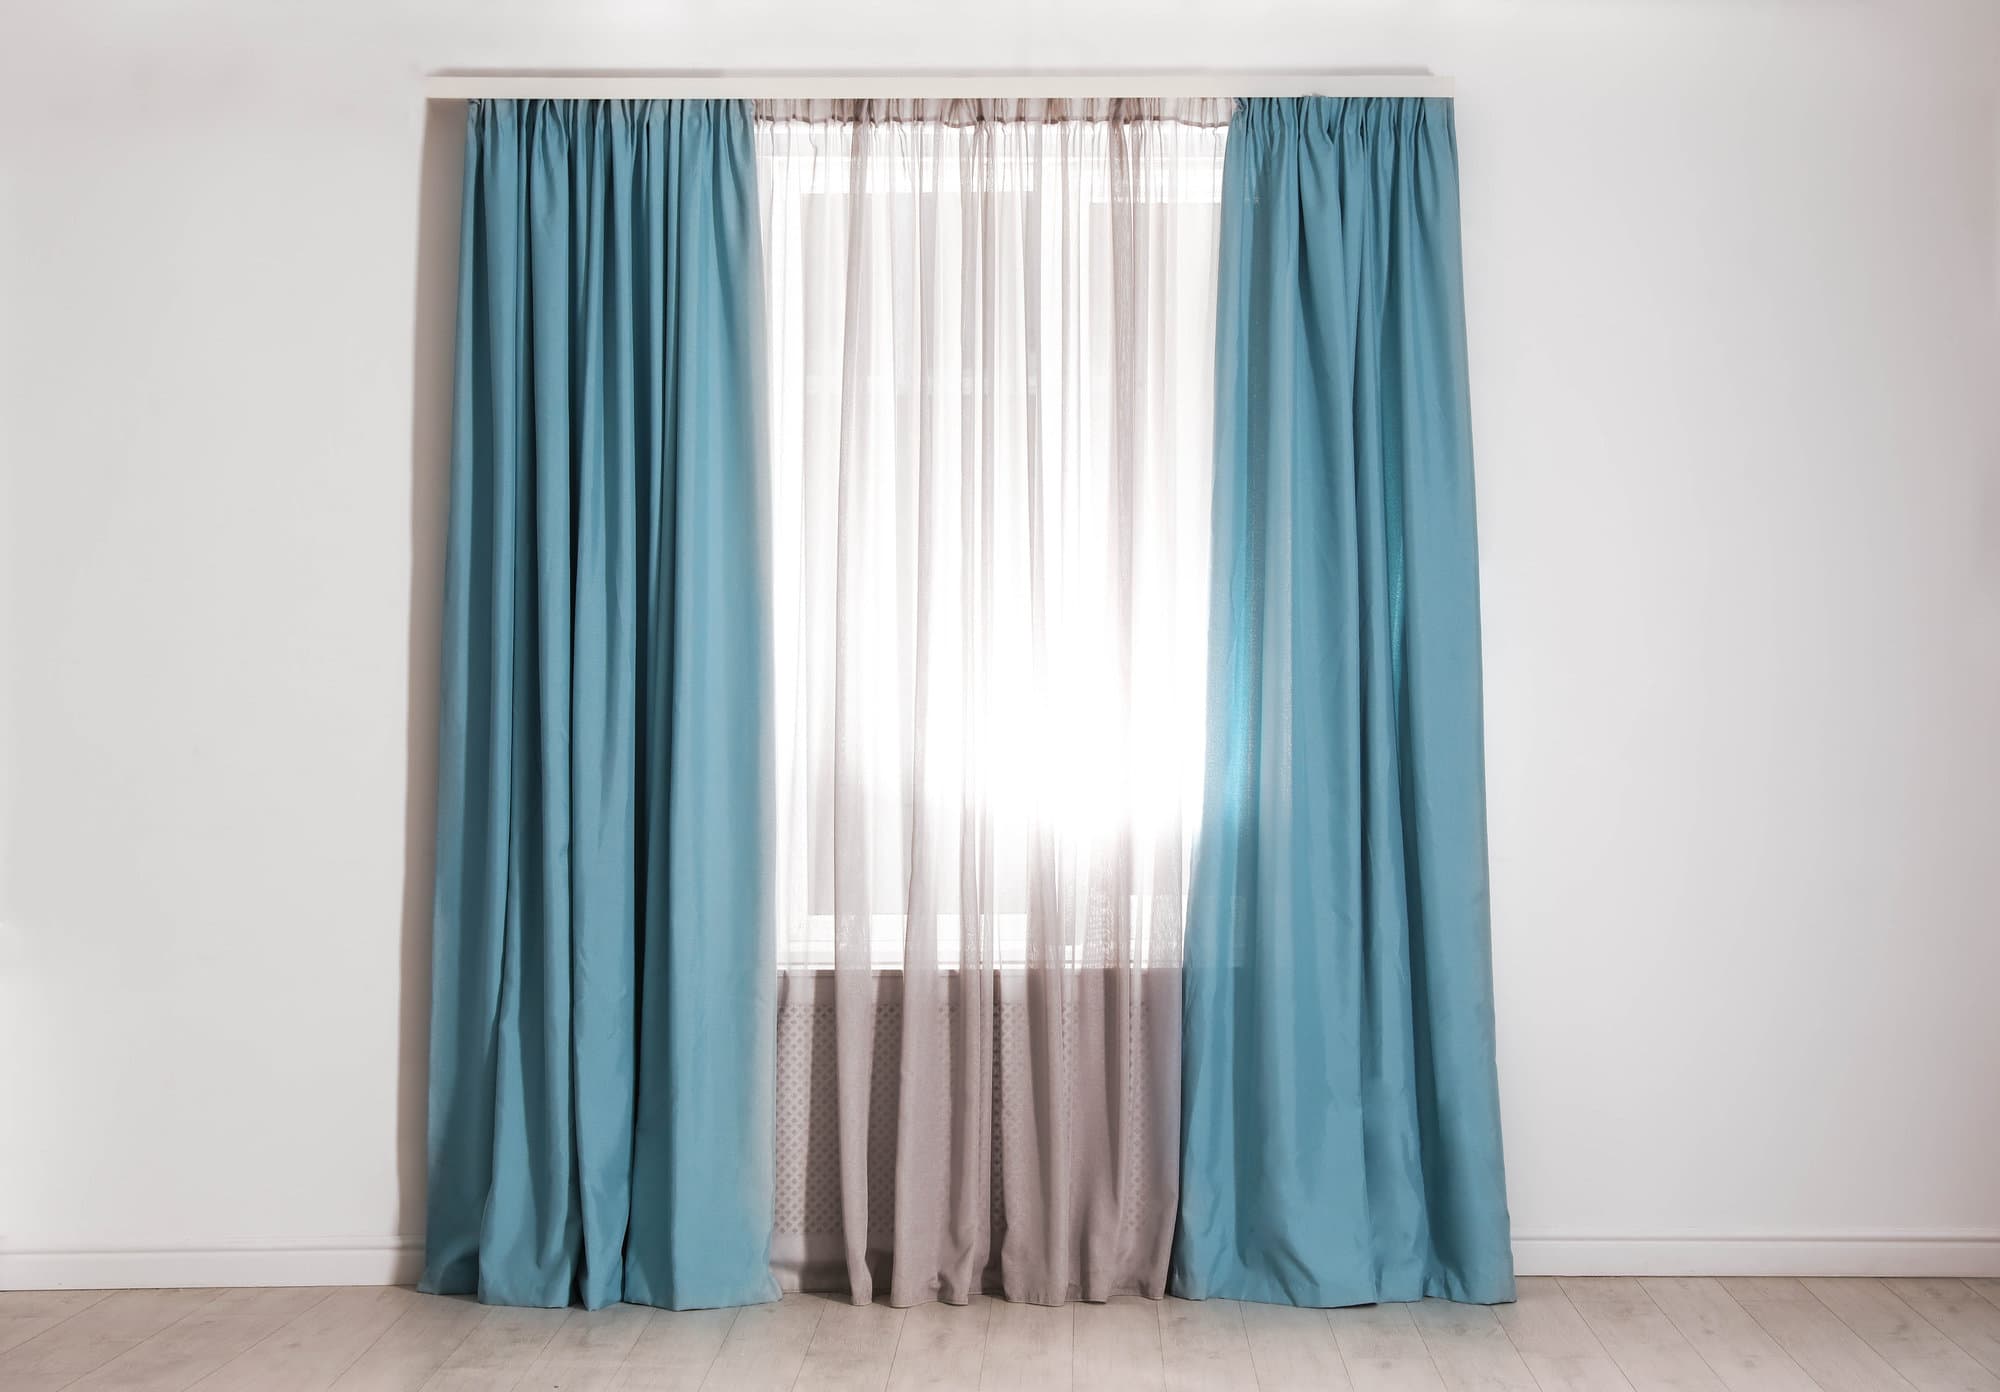  Blue Curtains Add a Breath of Fresh Air to Your Home